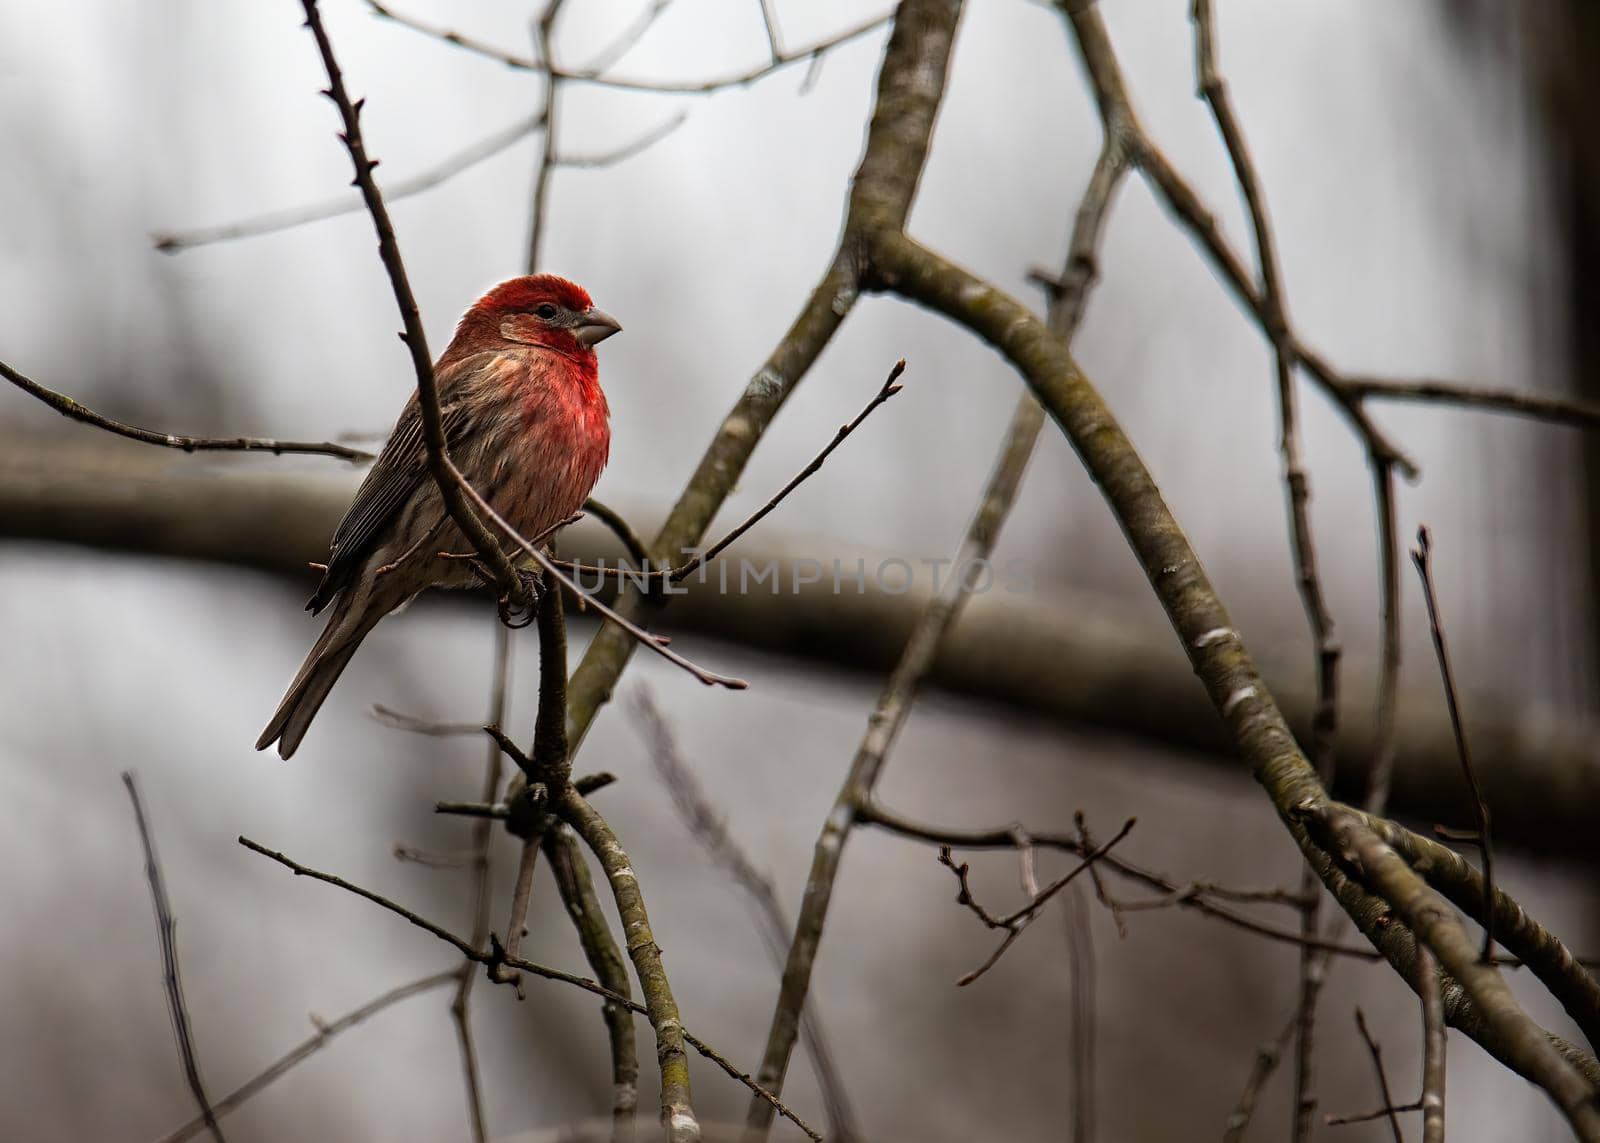 A mature male house finch with bright red feathers perches on a small tree limb.